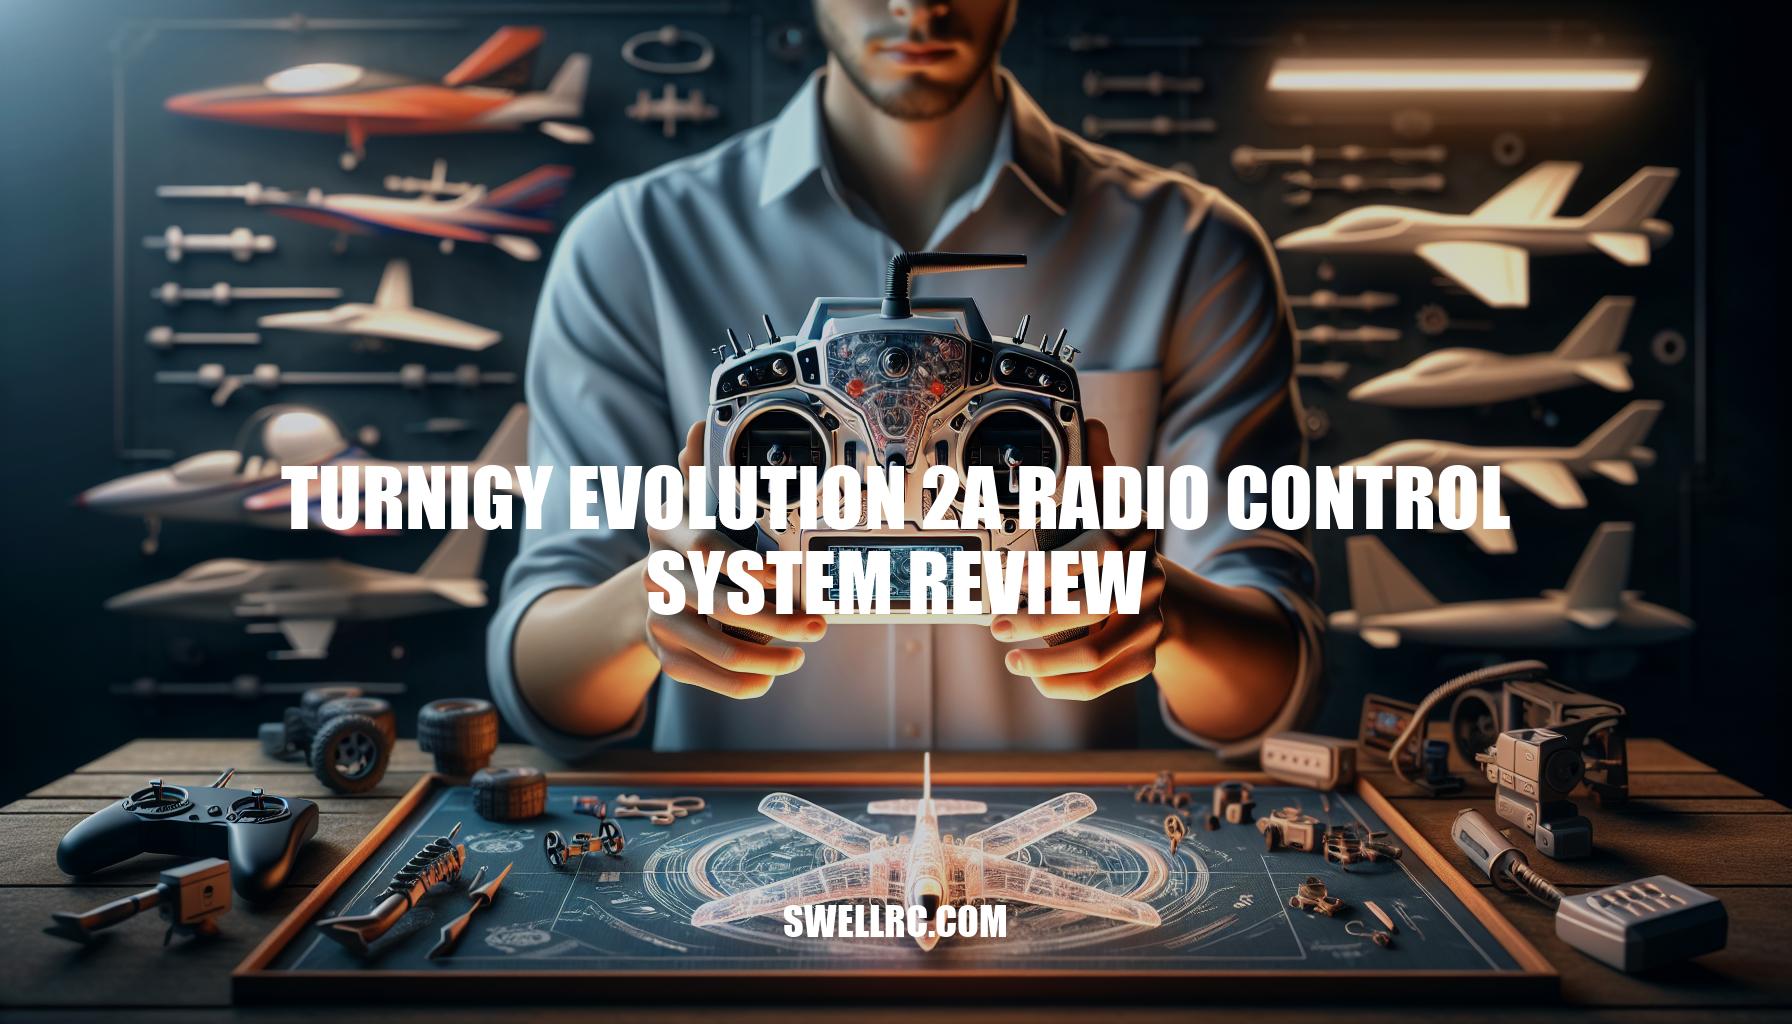 Turnigy Evolution 2A Radio Control System Review: Pros, Cons, and User Experience